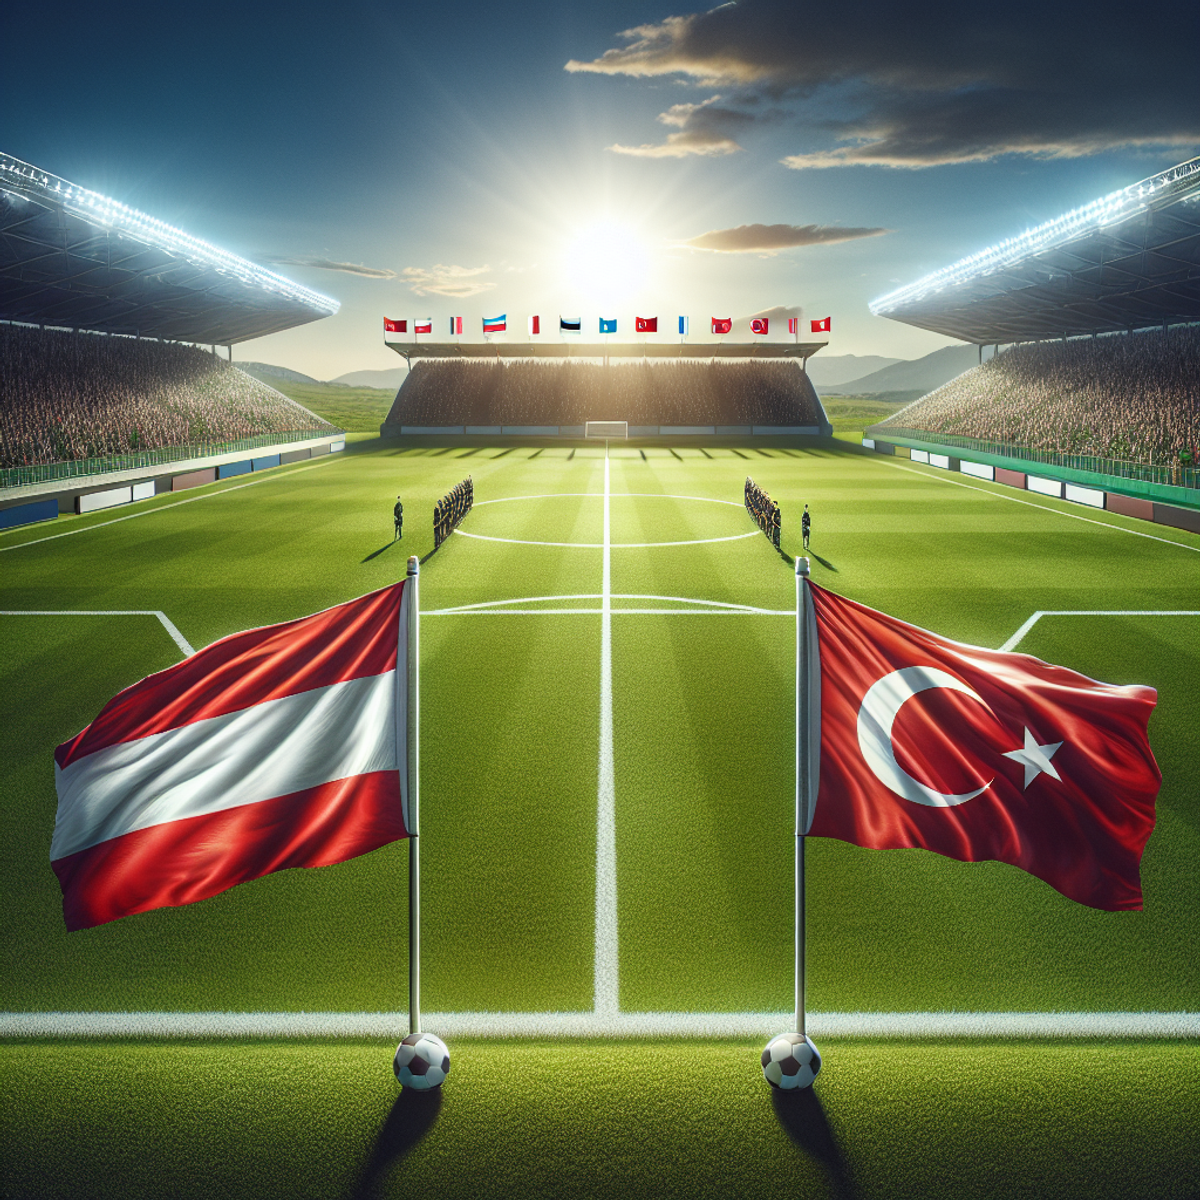 A football pitch with flags of Austria and Turkey waving at opposite ends under a clear sky.